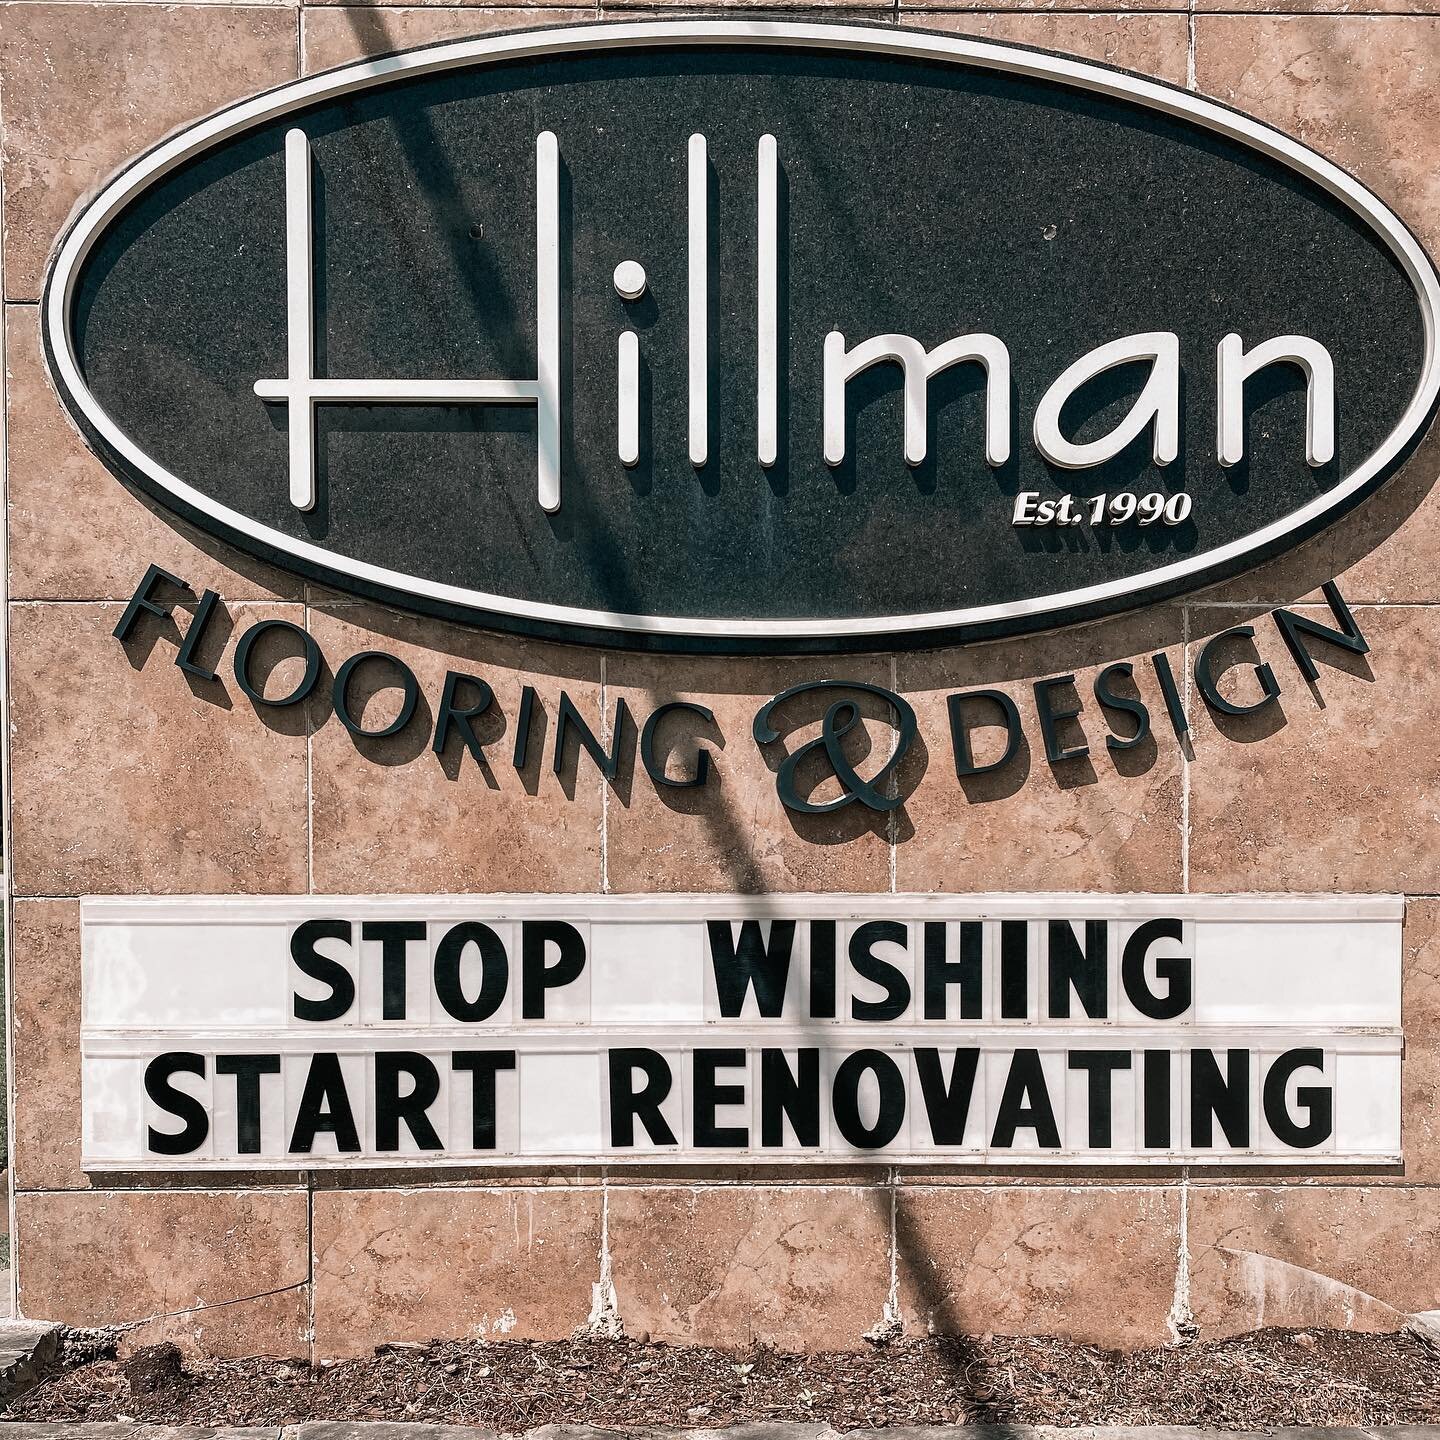 We can help you start the process of your dream renovation. Our team will make you feel comfortable with large projects and will see it to completion. Contact our team today! #hillmanflooringanddesign #hillmanflooring #renovation #project #hardwood #